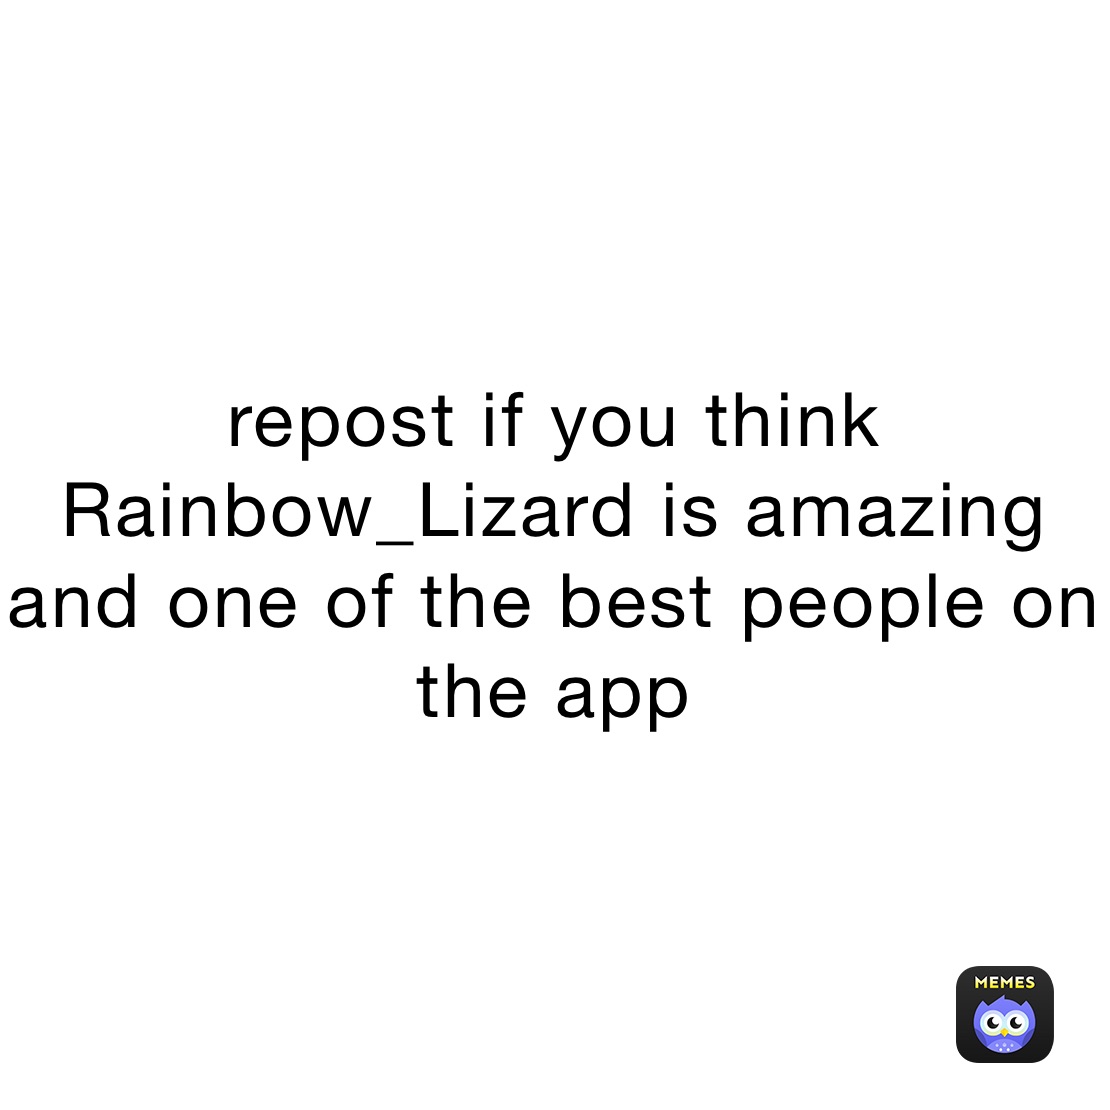 repost if you think Rainbow_Lizard is amazing and one of the best people on the app